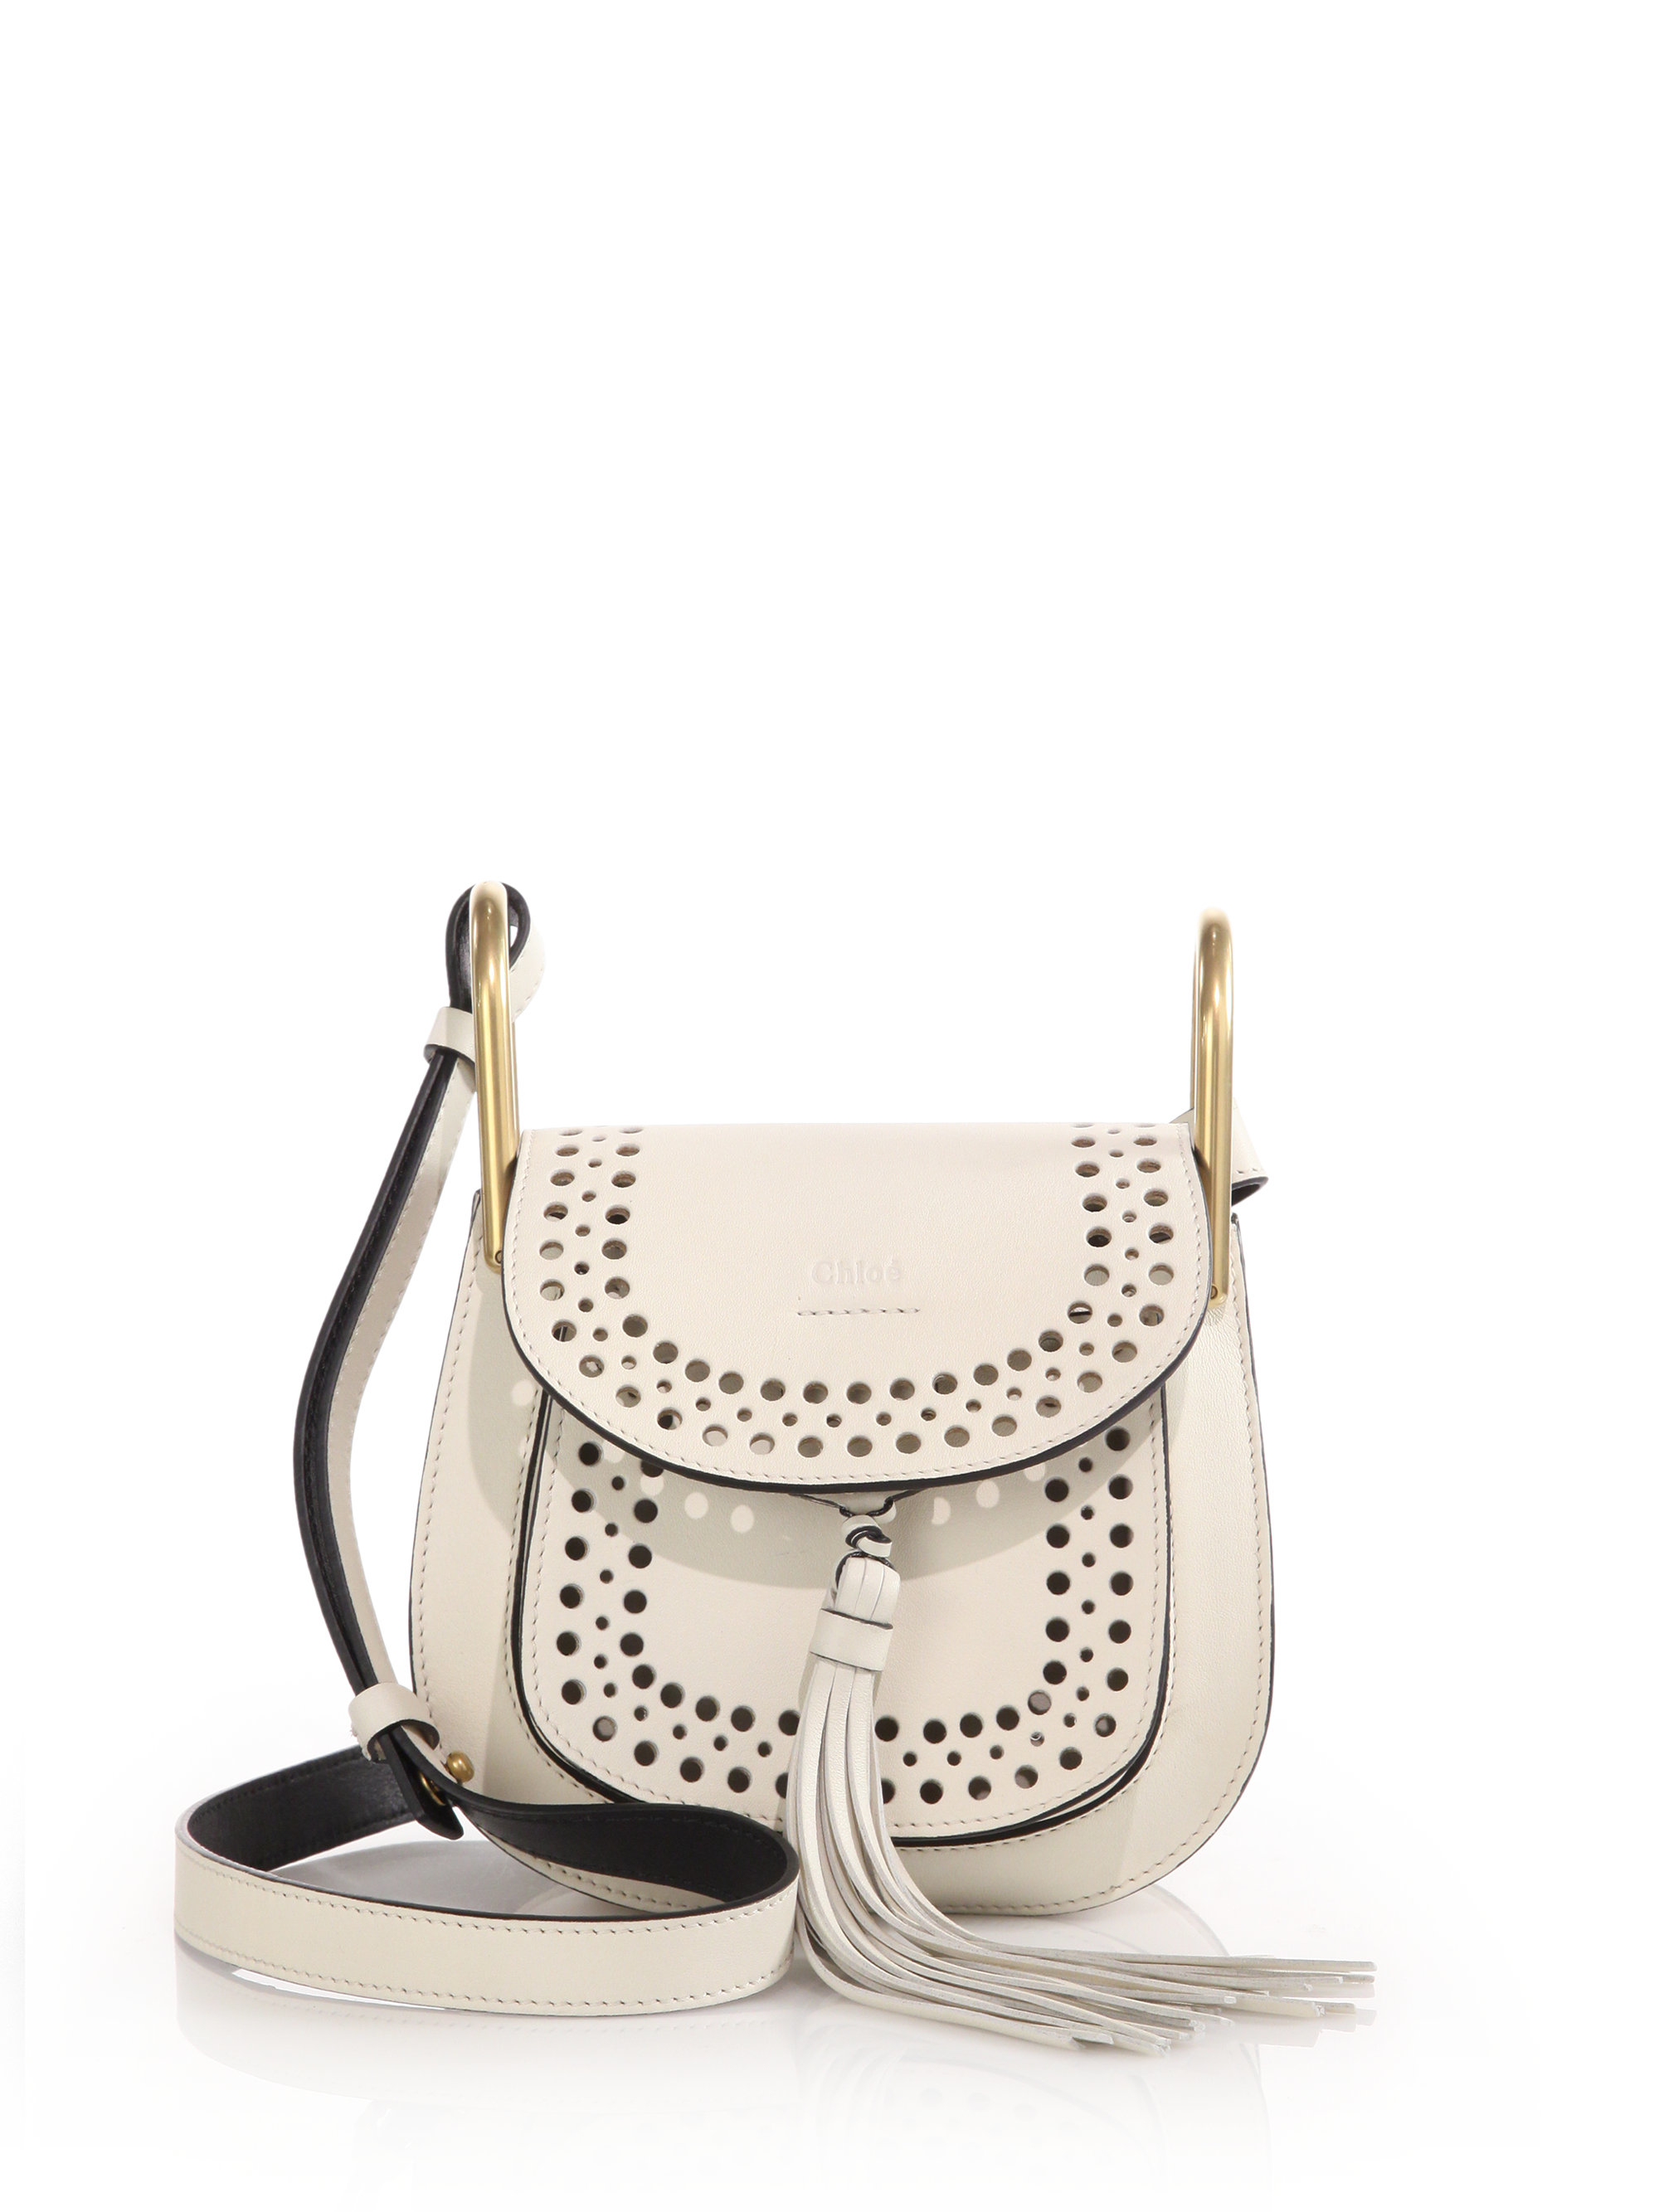 Chlo Hudson Perforated Leather Mini Saddle Bag in White - Save 30 ...